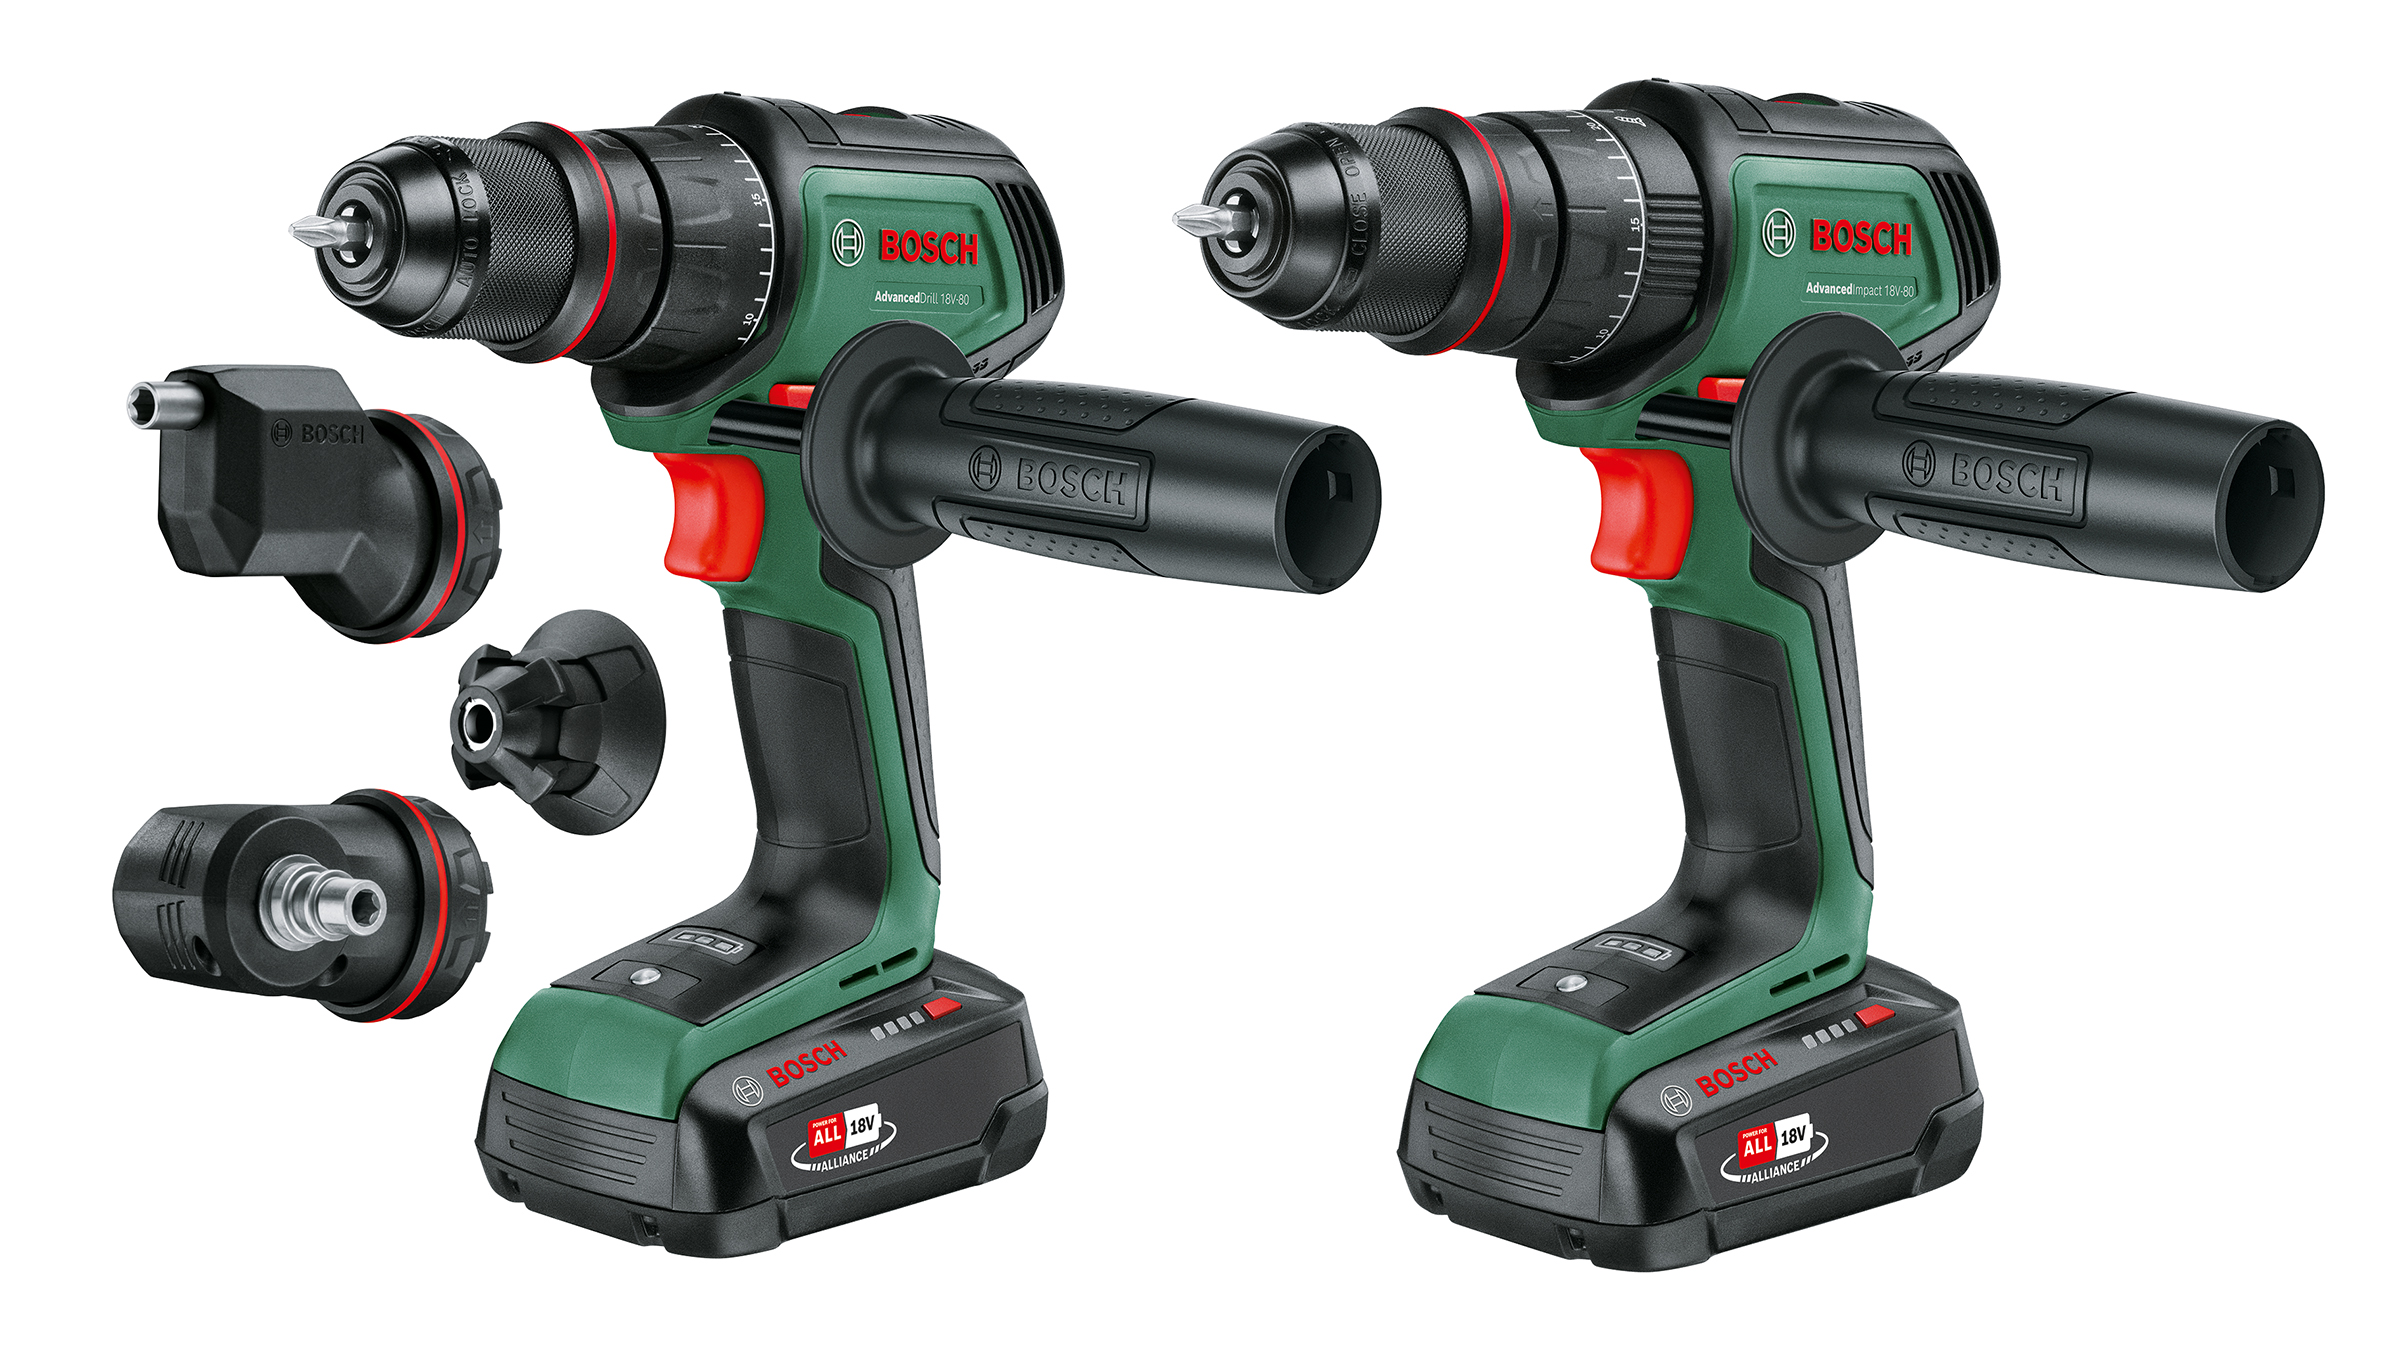 Two cordless drill drivers with interchangeable attachments from Bosch:  High-performance screwing, drilling, and impact drilling